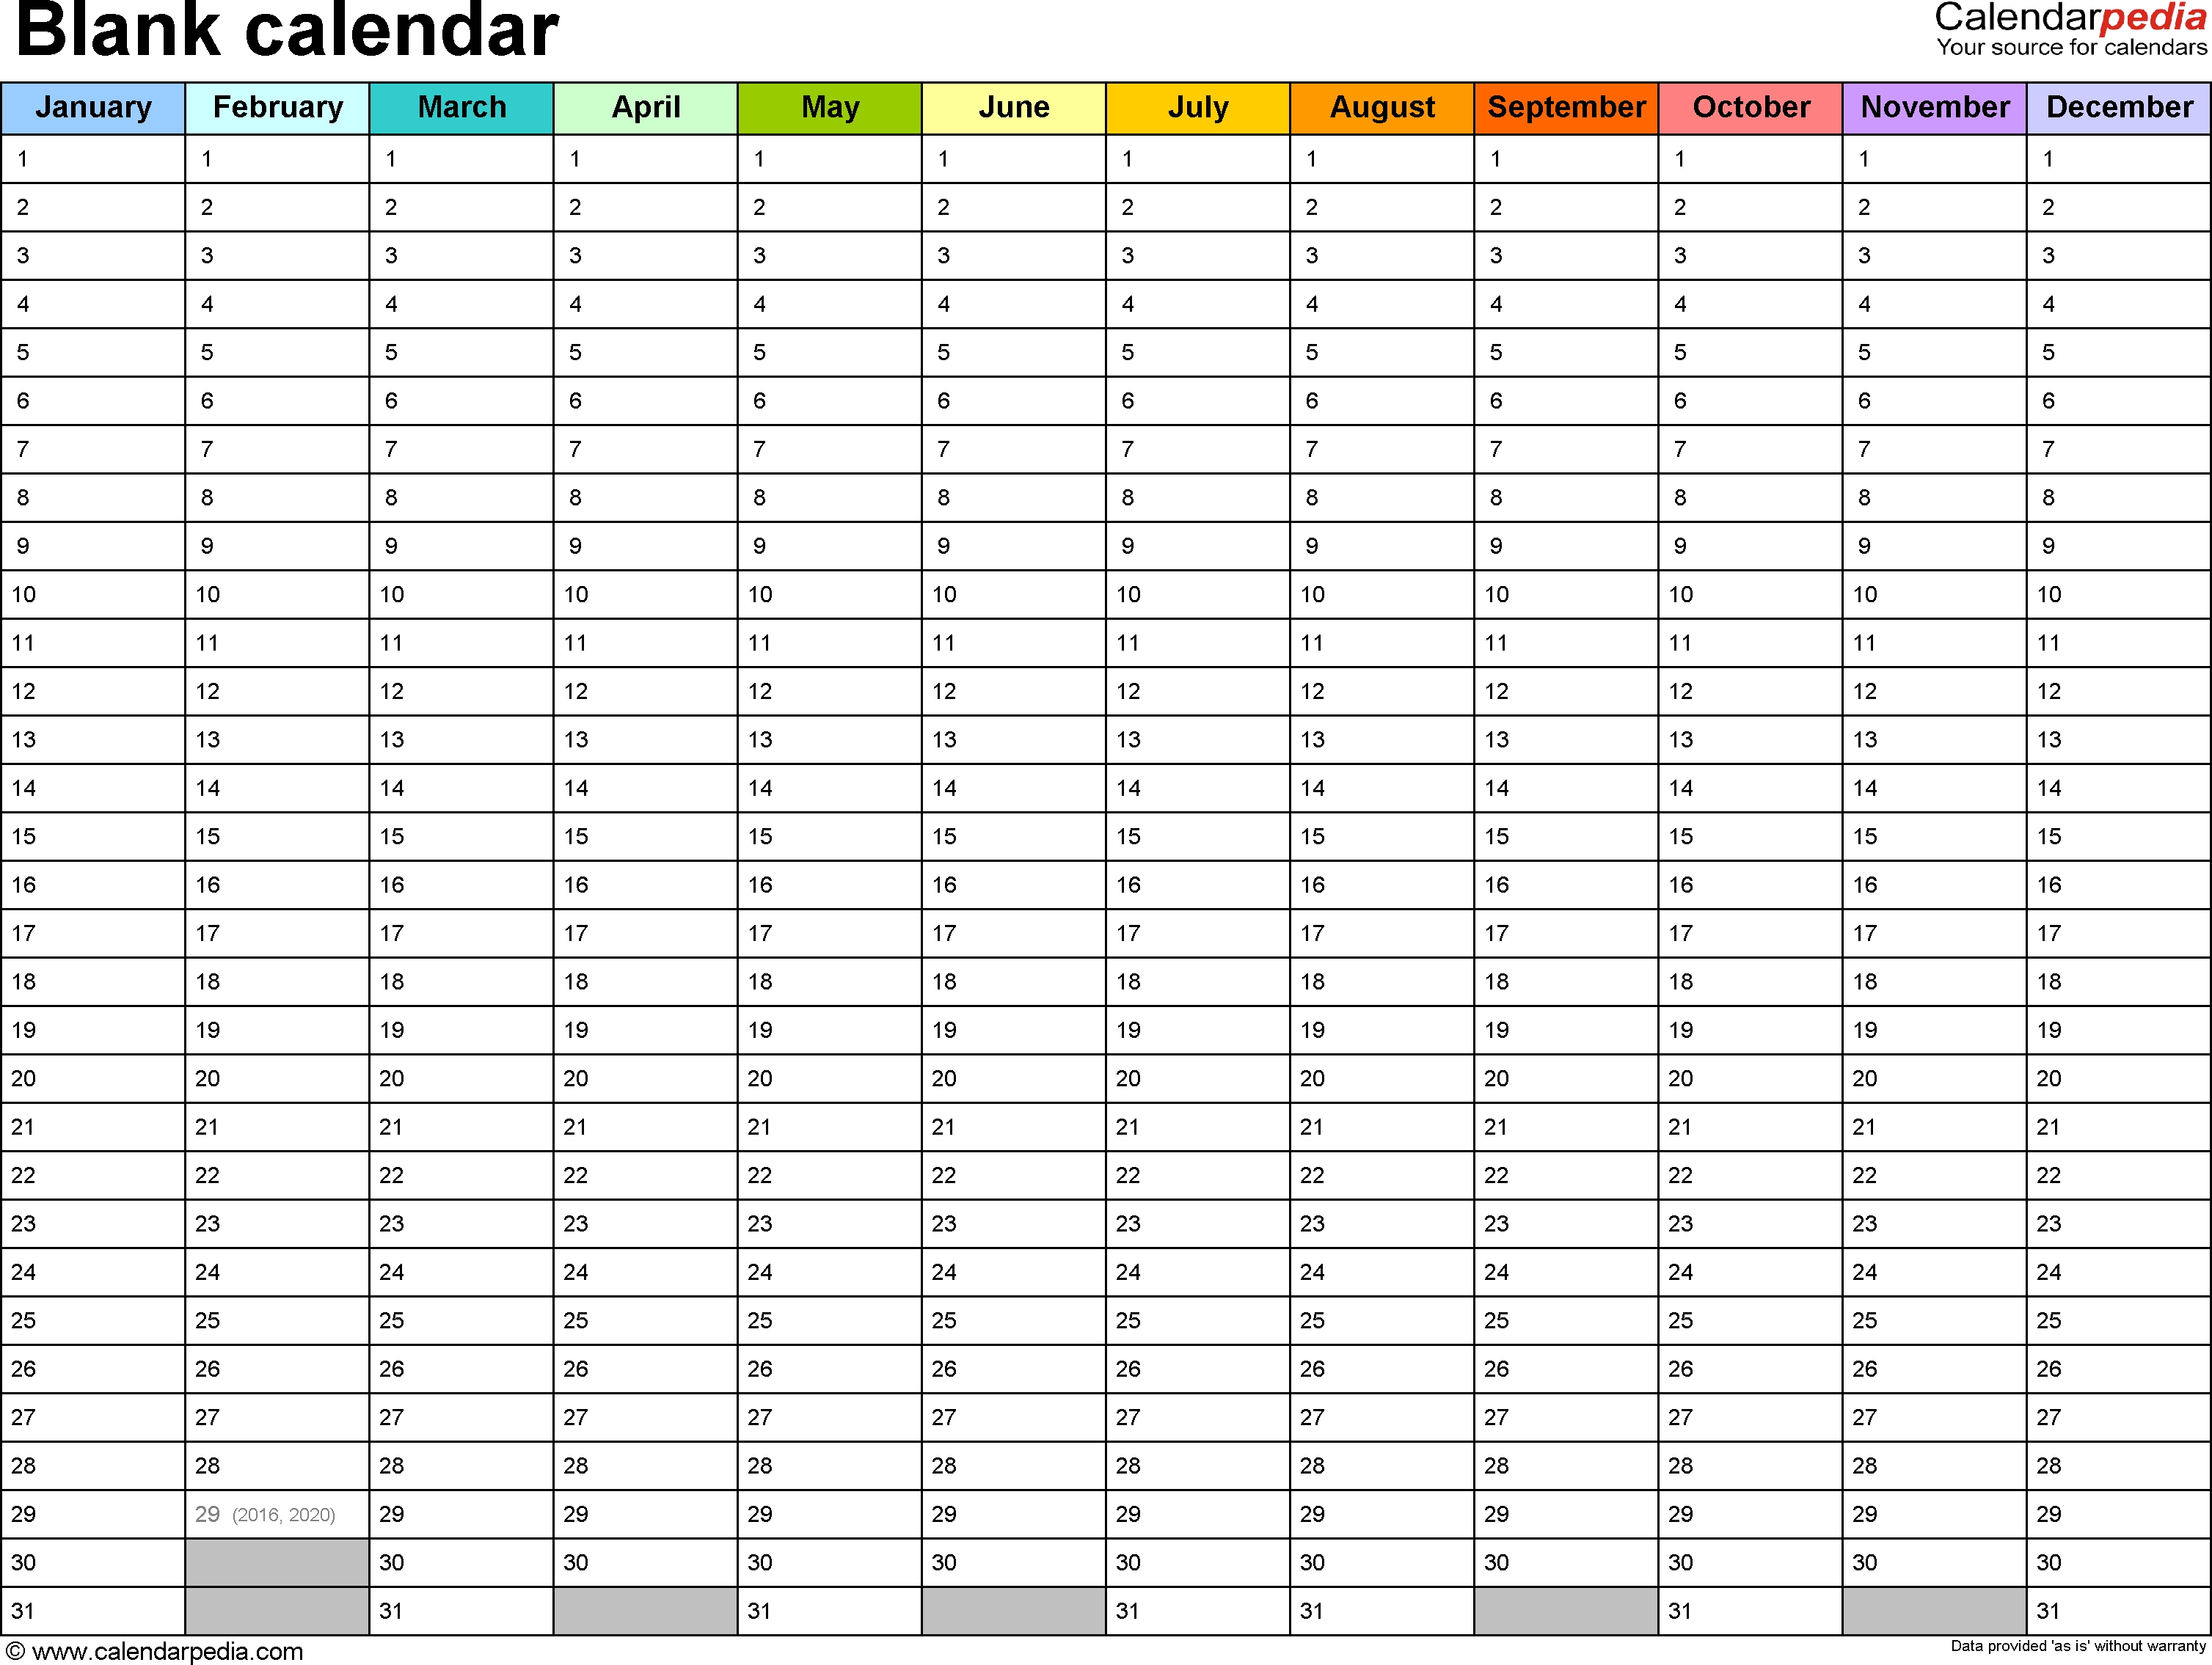 Blank Calendars - Free Printable Microsoft Excel Templates-Blank Yearly Calendar Template In Word 2003